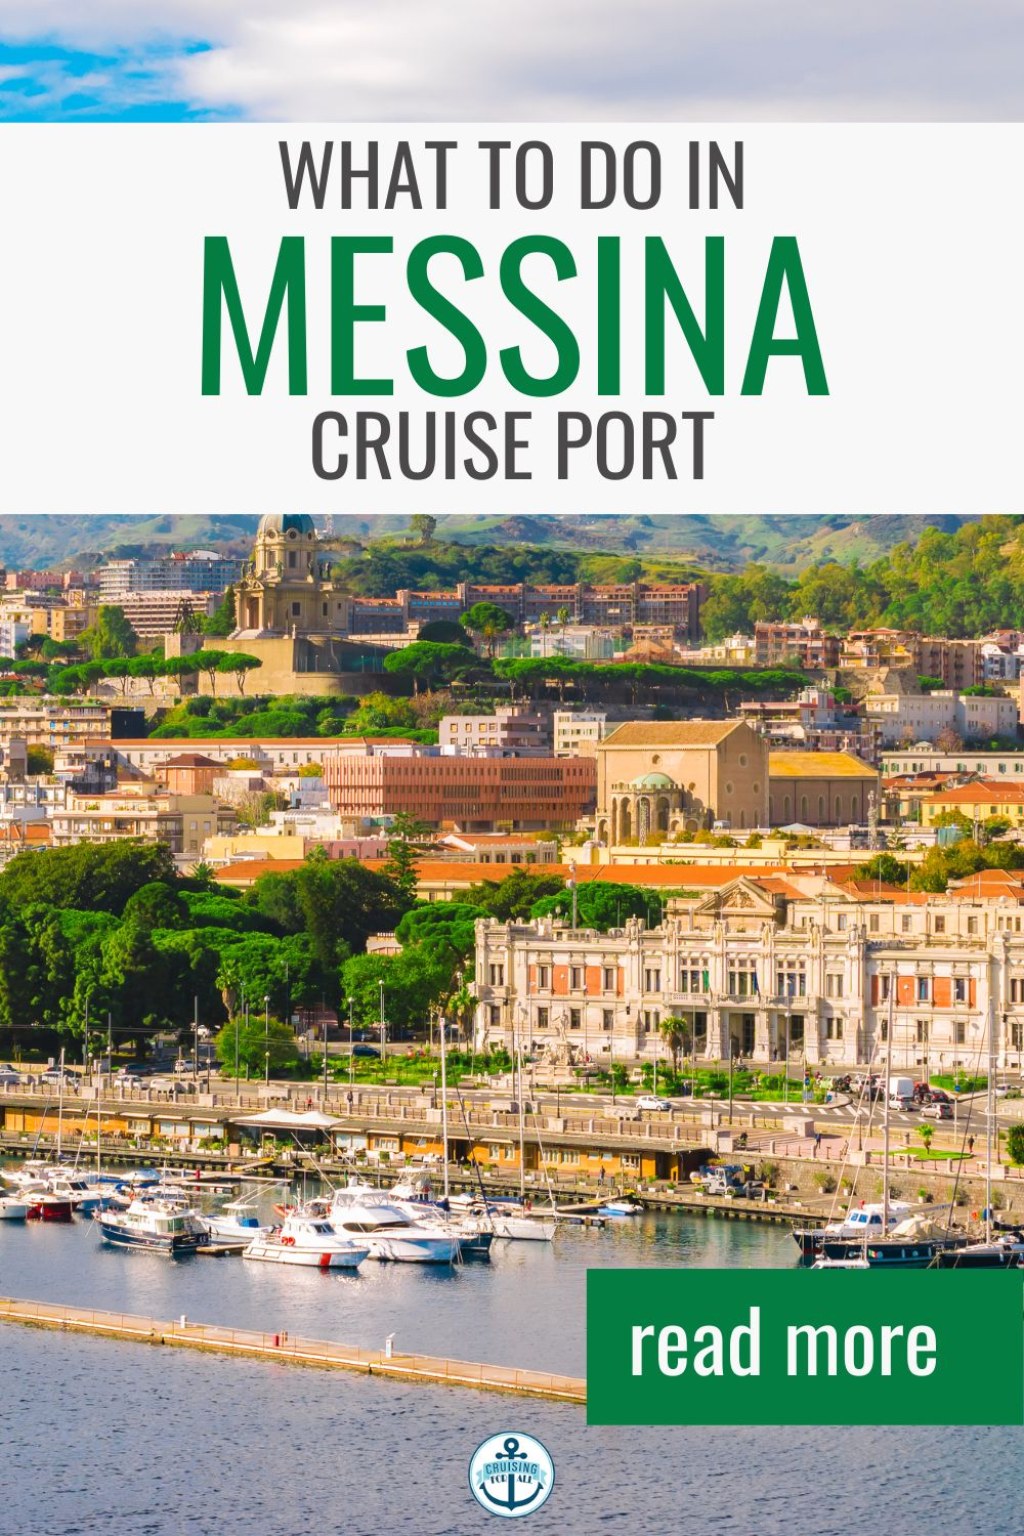 what to do in sicily from a cruise ship - Guide To What To Do At Messina Cruise Port - Cruising For All